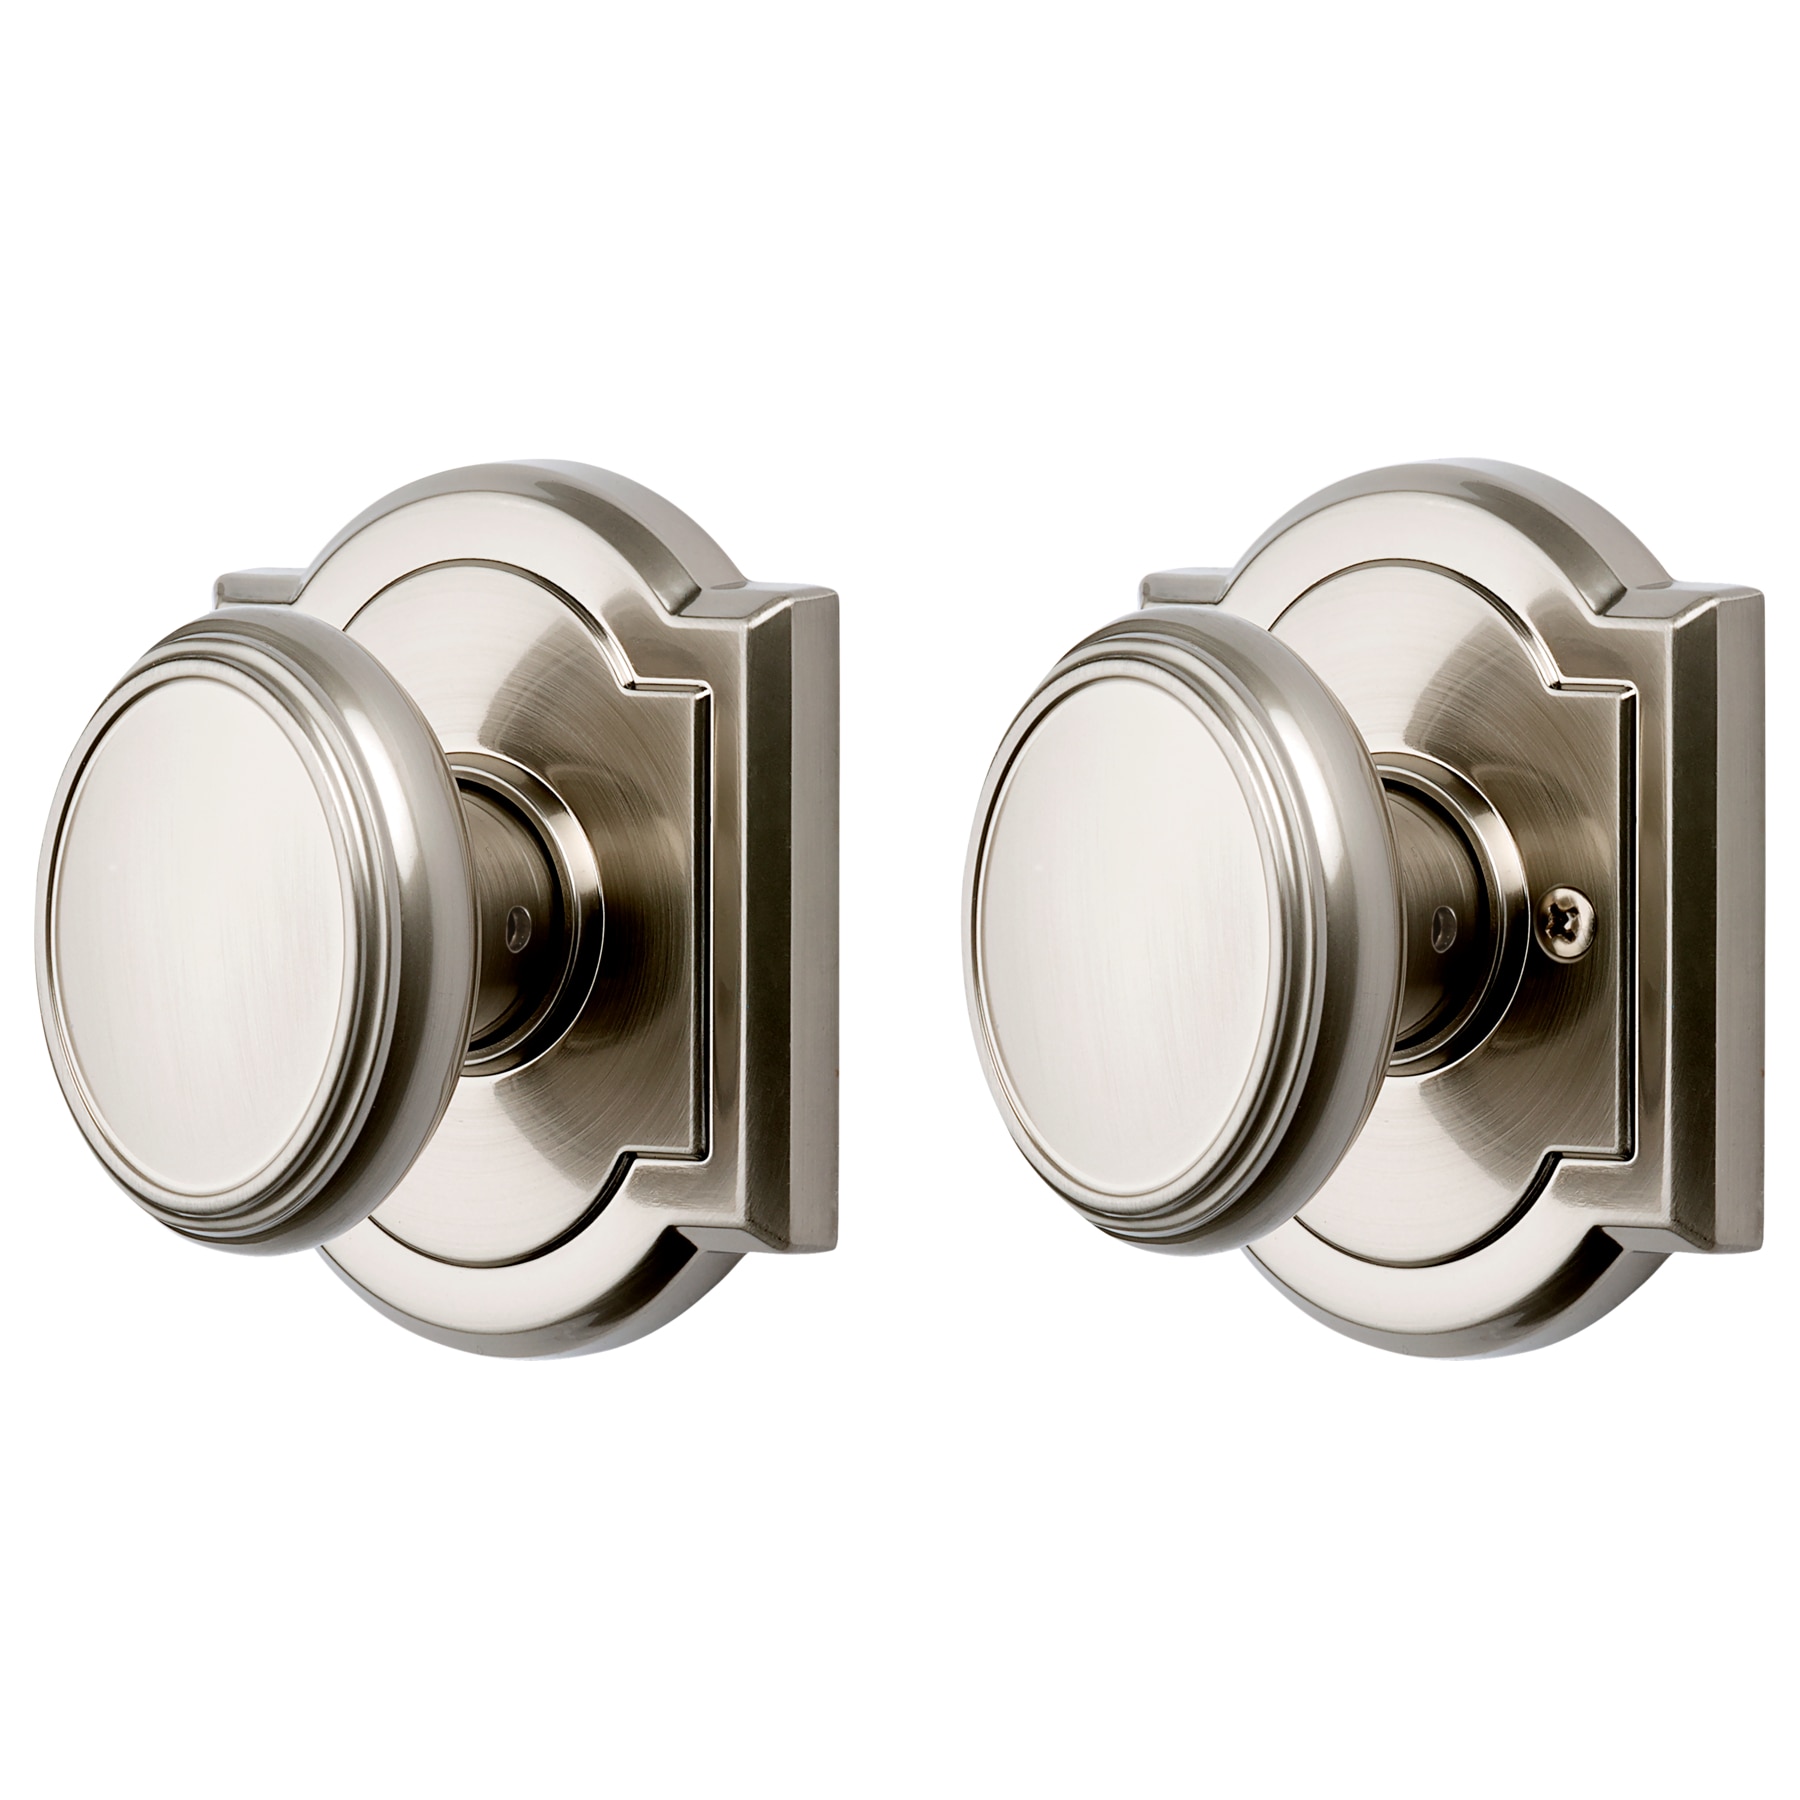 Pair of Rustic Acryllic Stone Effect Mortice Door Knobs With Brass Backplates 